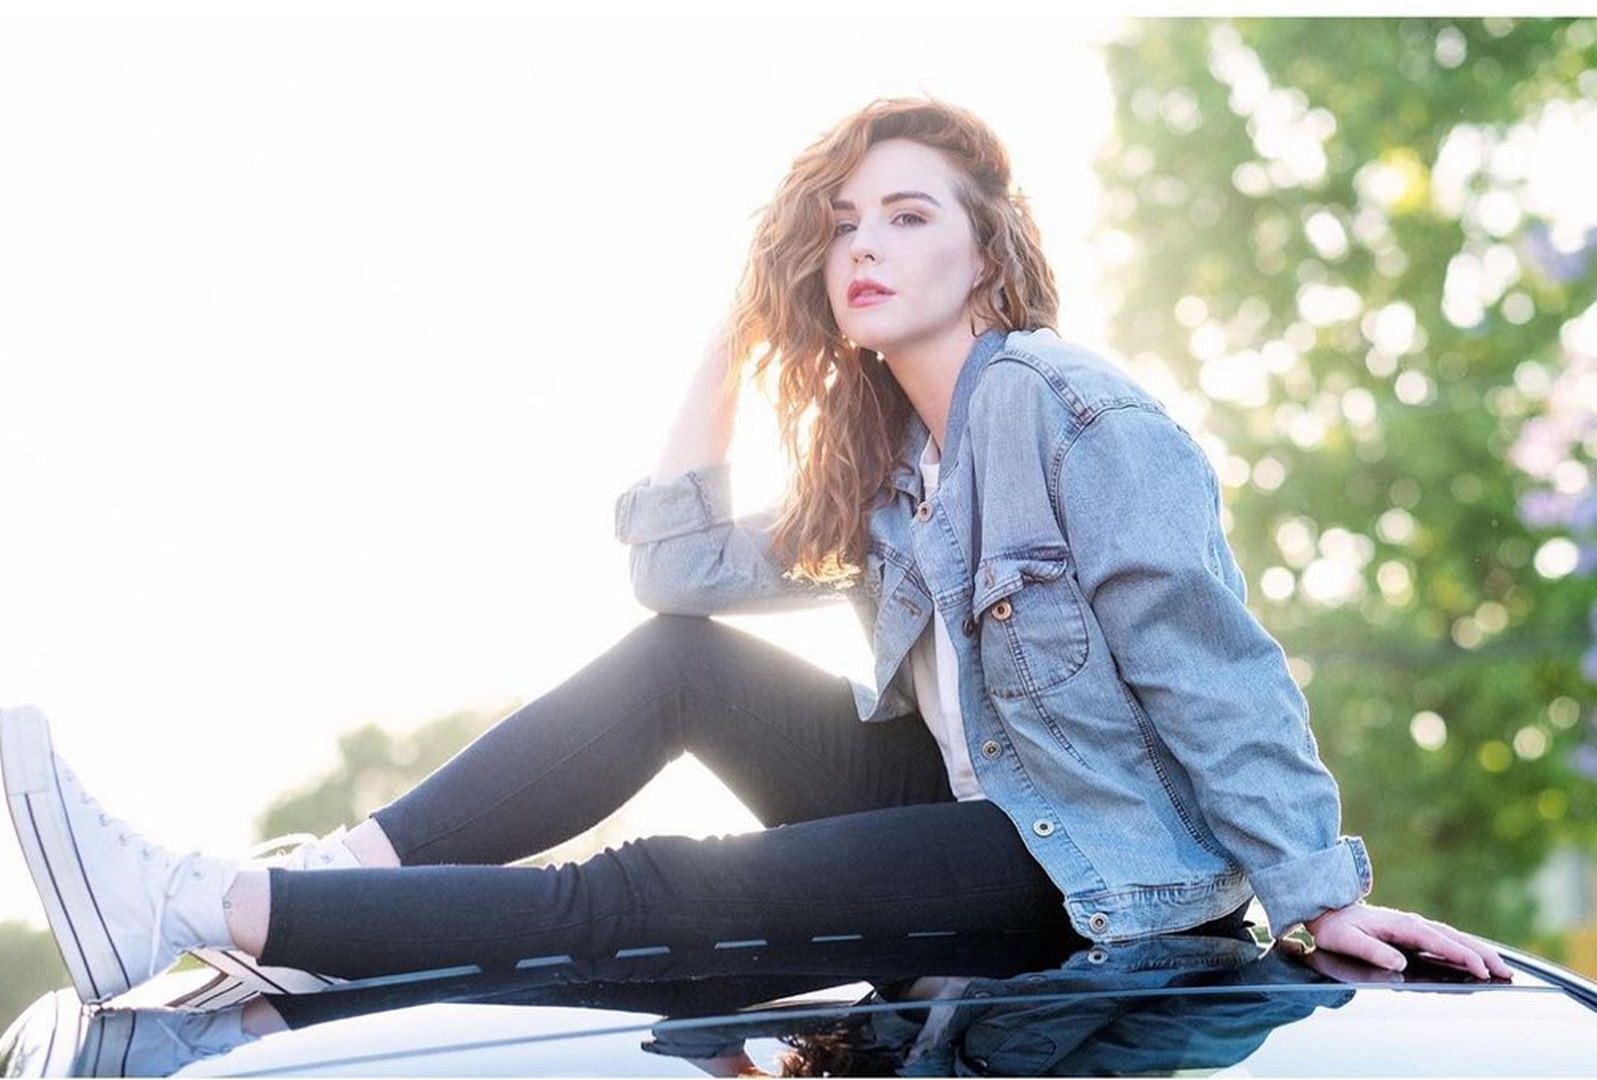 Camryn Grimes as Cassidy in The Young and the Restless (Image via @camryngrimes | Instagram)